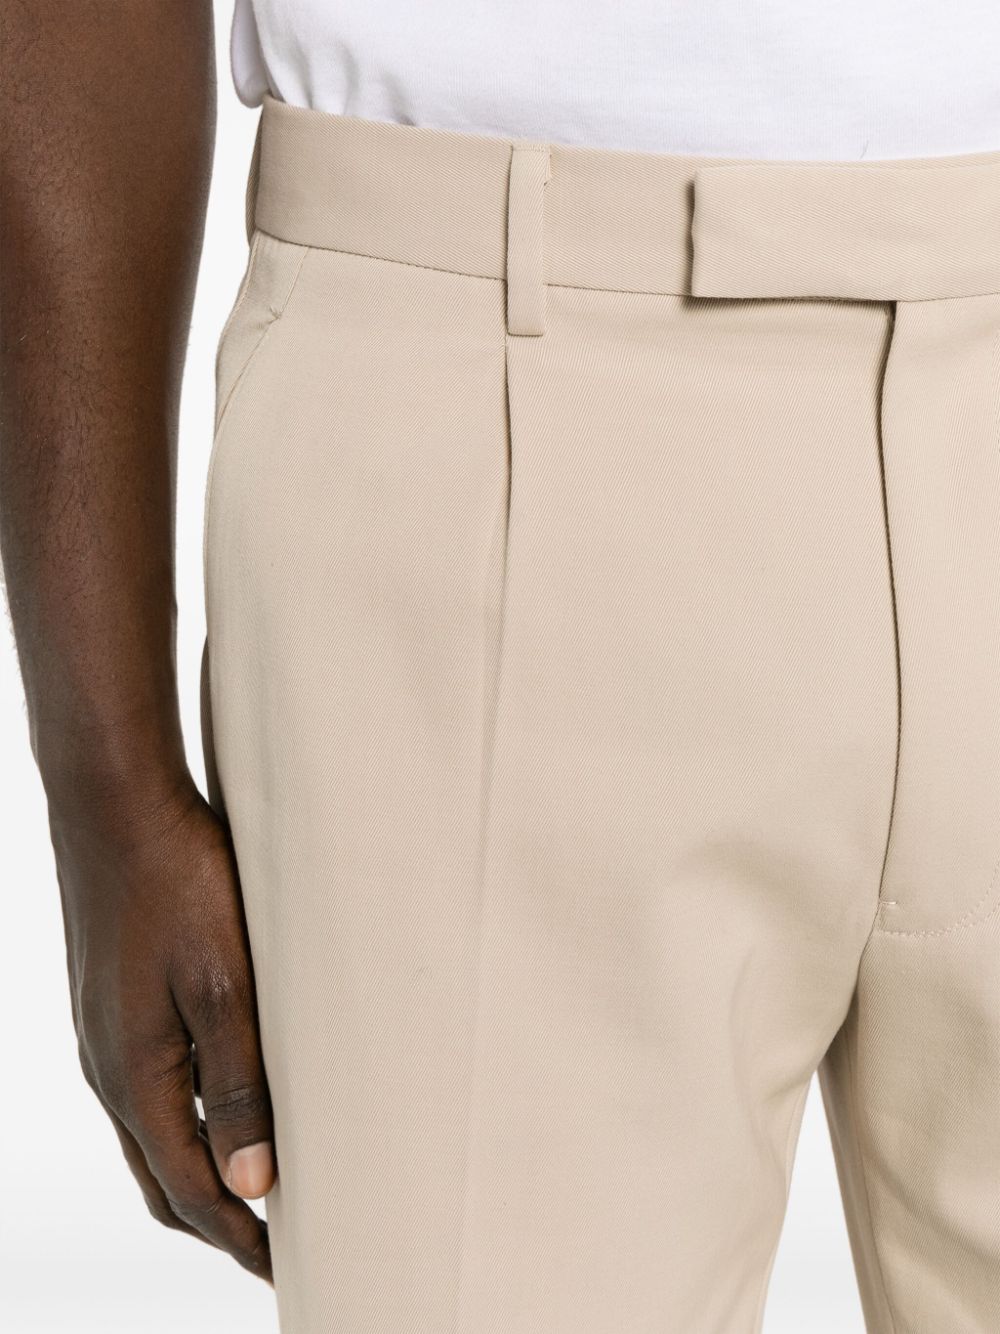 Shop Zegna Tapered Tailored Trousers